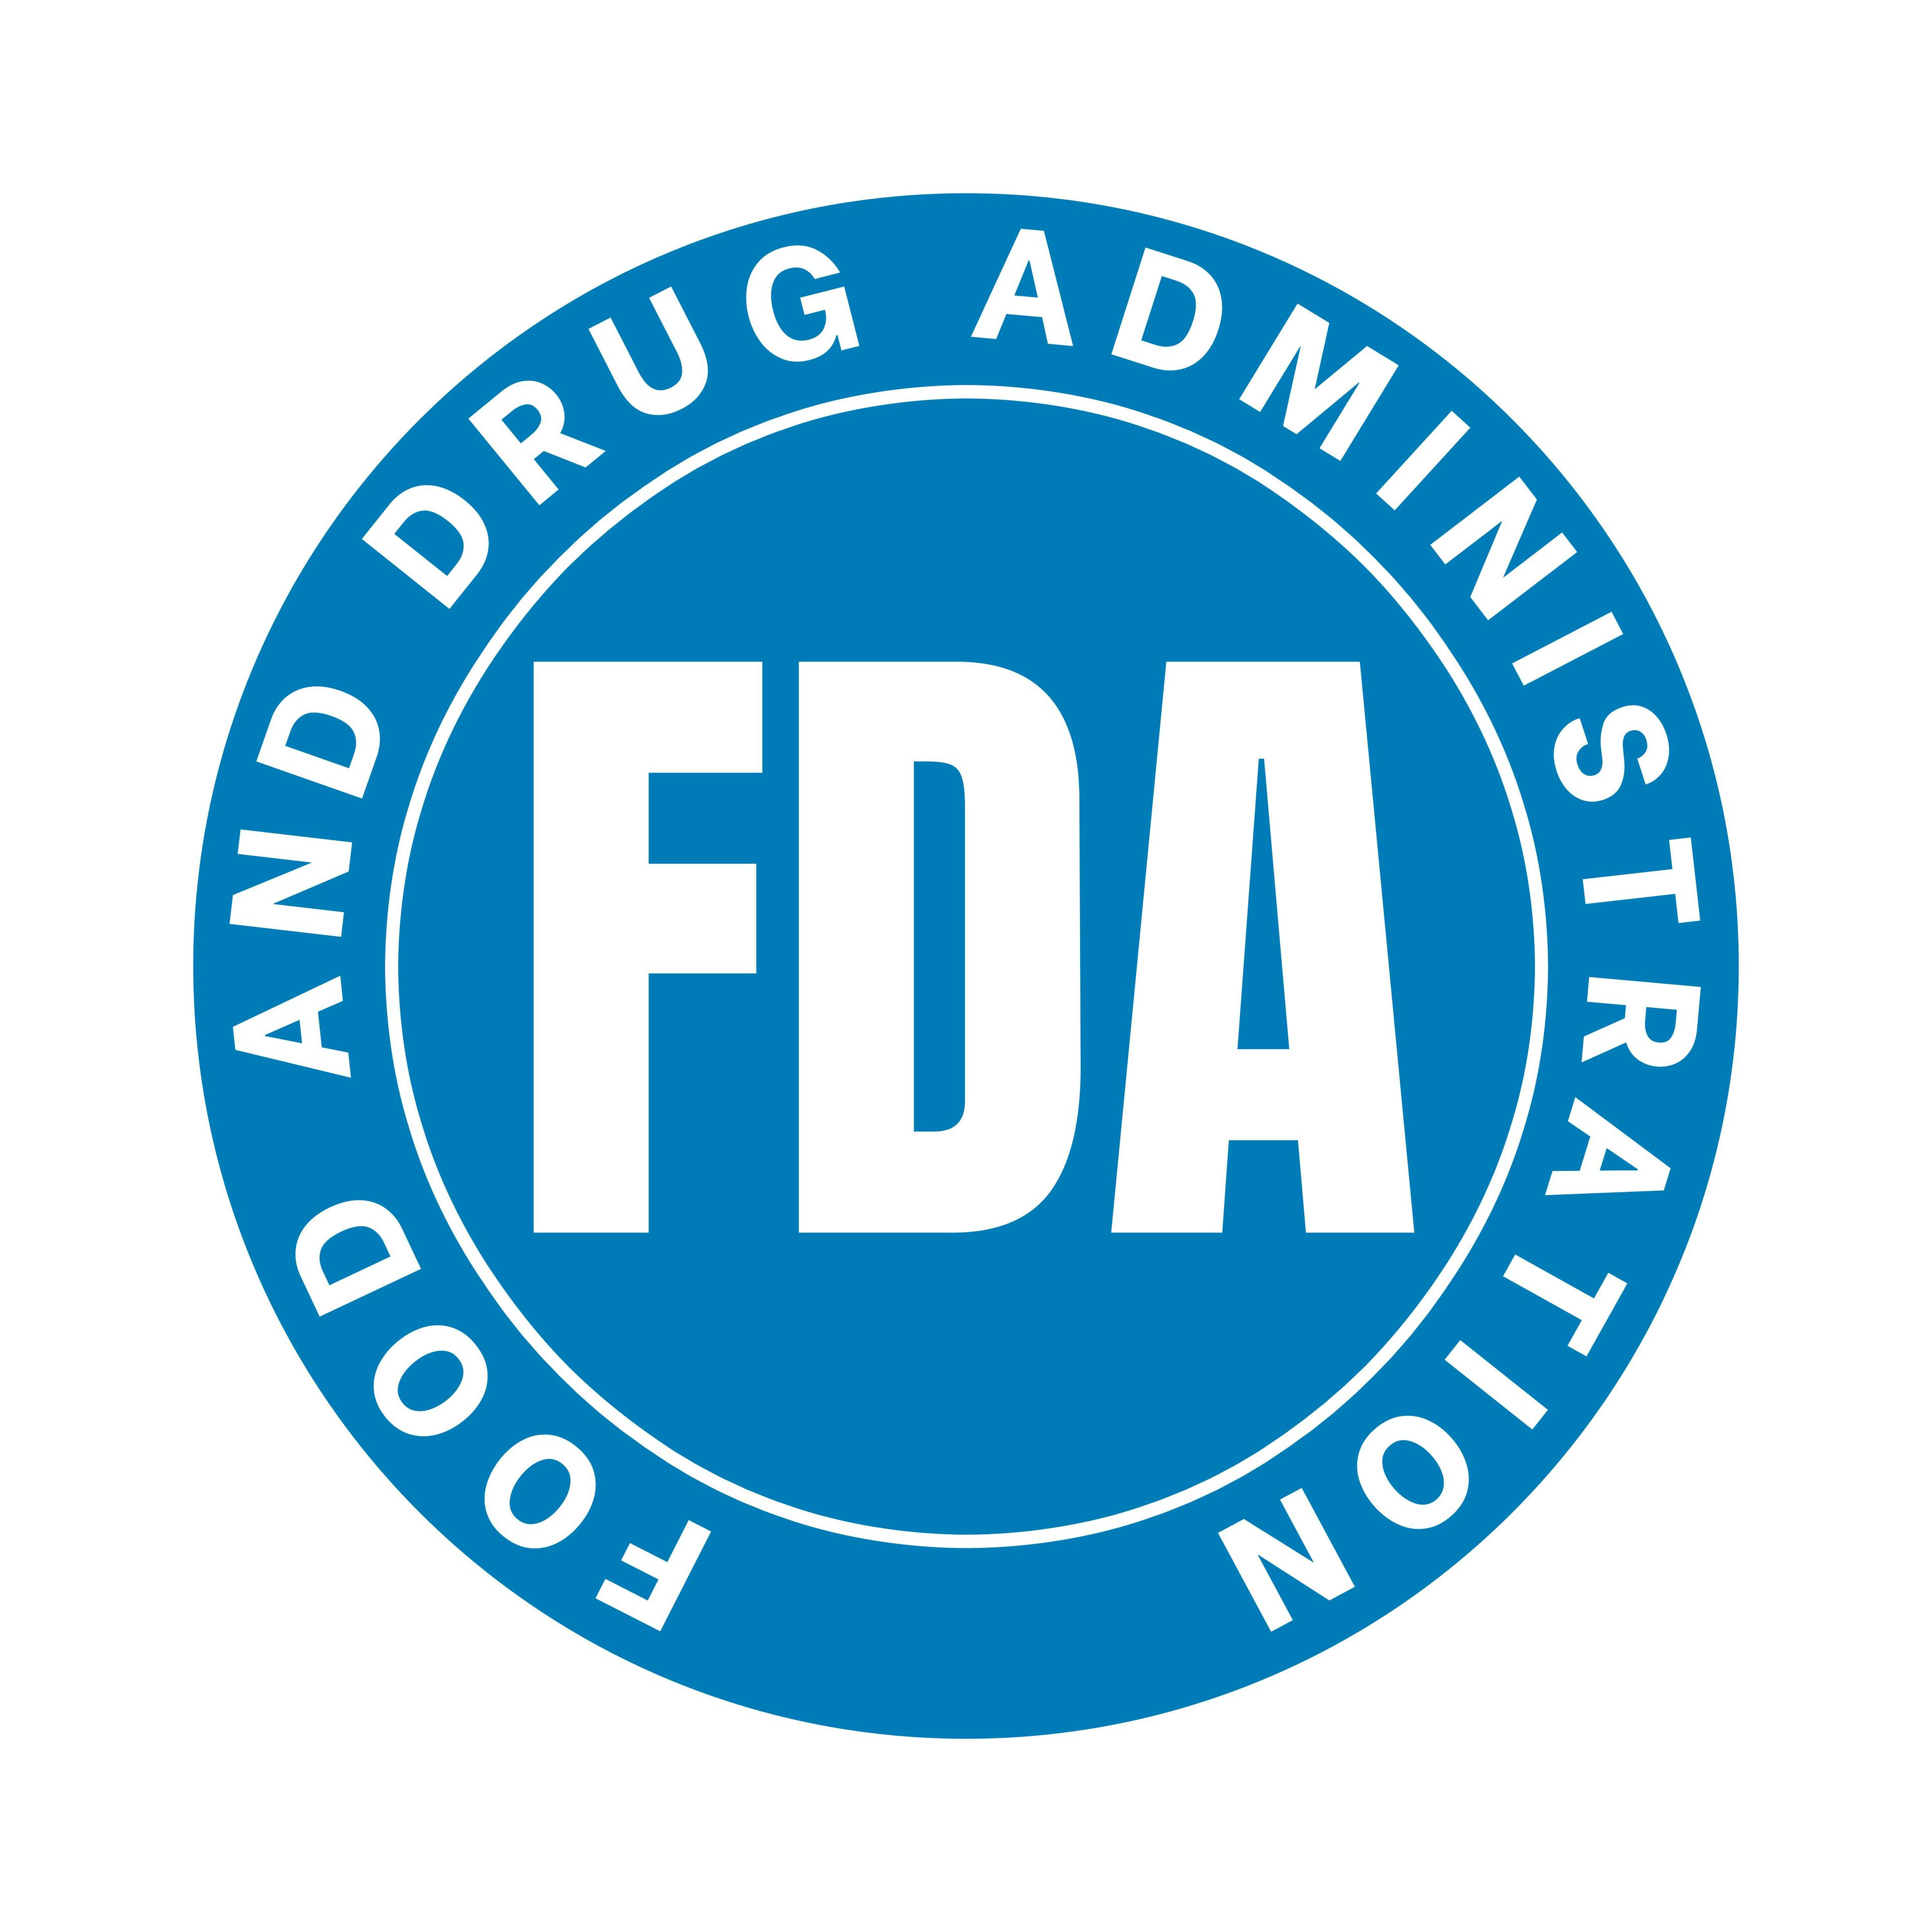 FDA Accepts Citius's Resubmitted BLA for Denileukin Diftitox for the Treatment of Adults with Relapsed or Refractory Cutaneous T-Cell Lymphoma